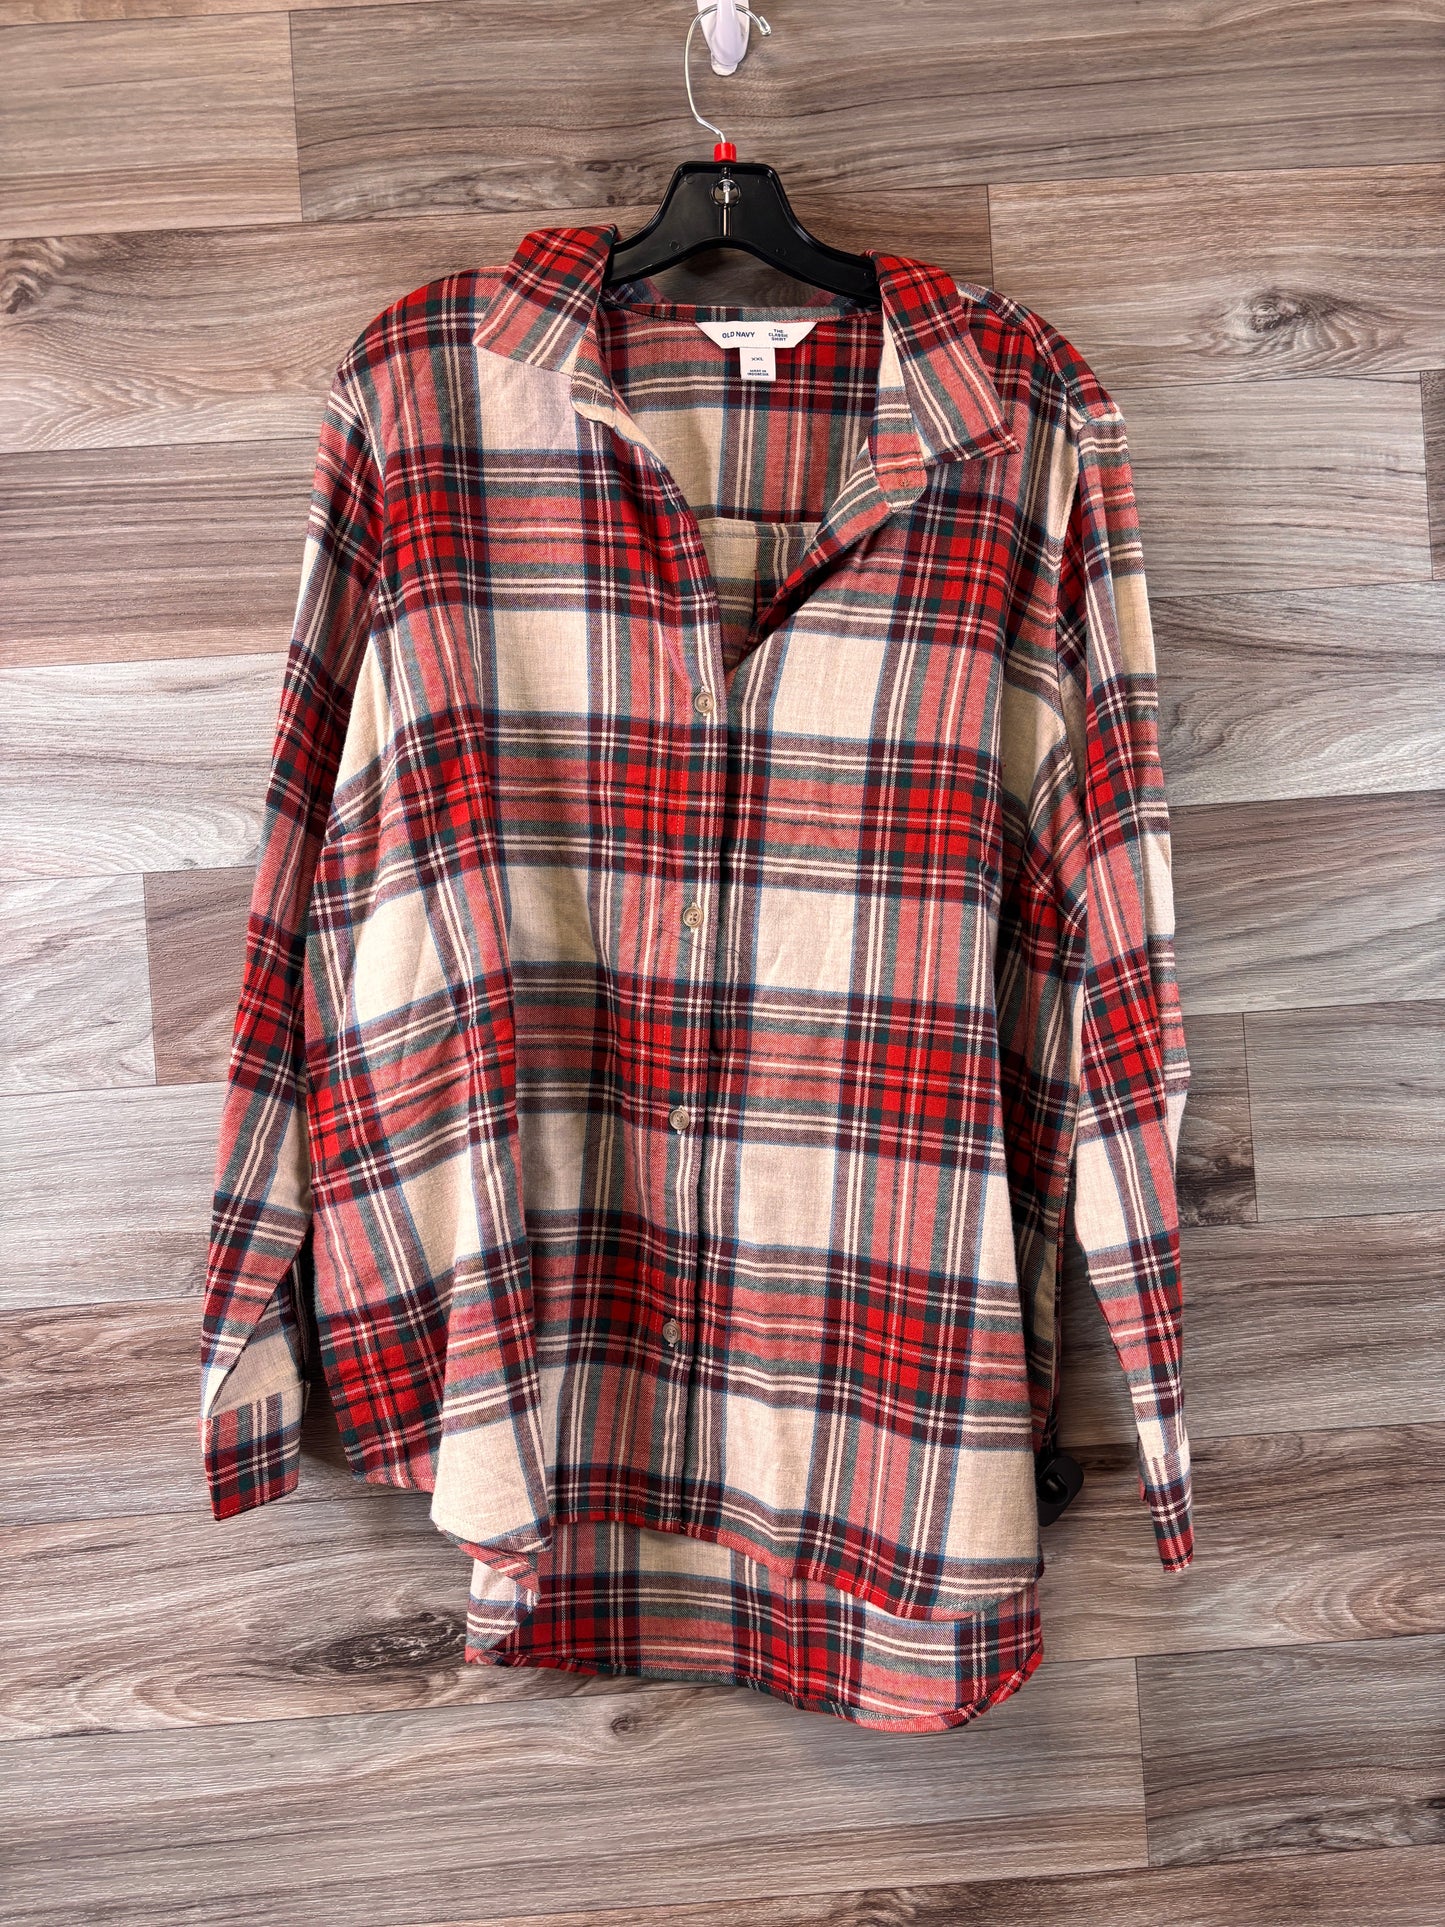 Plaid Pattern Top Long Sleeve Old Navy, Size Xxl